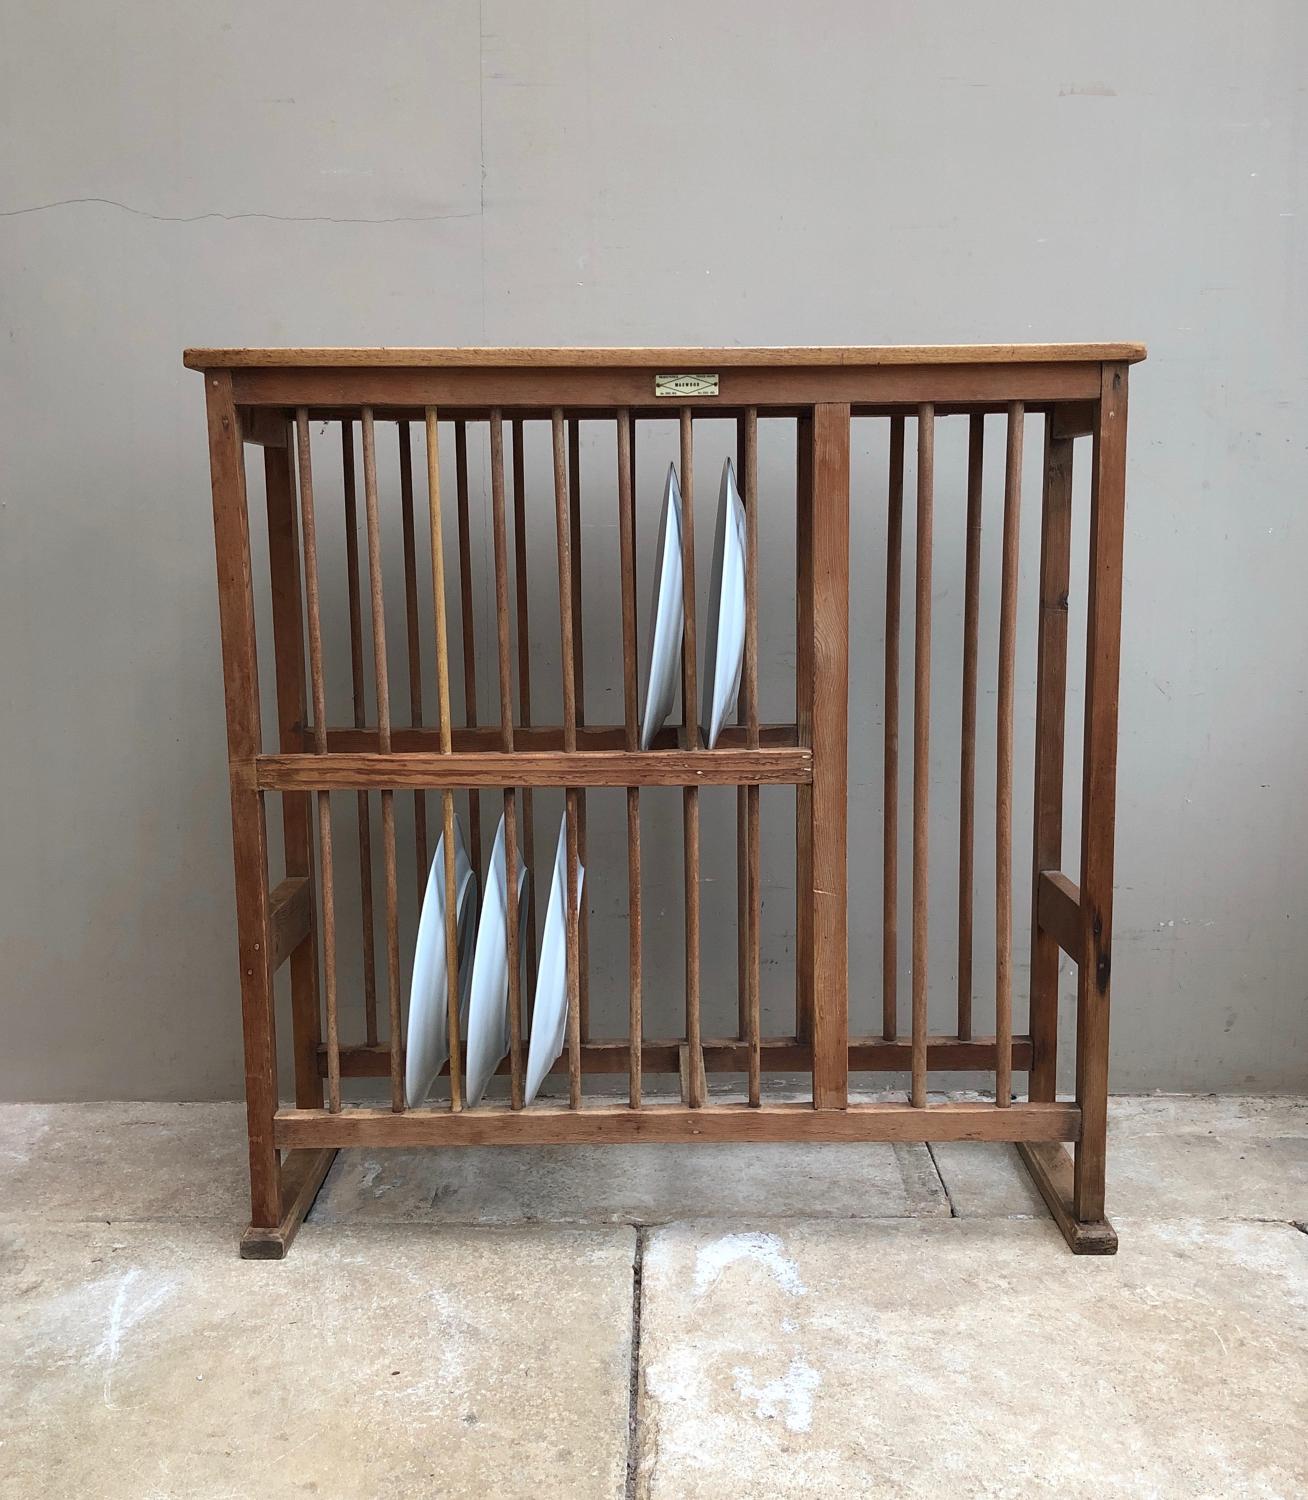 1940s Pine Plate Rack with Shelf Top to Wall Hang or Free Stand.